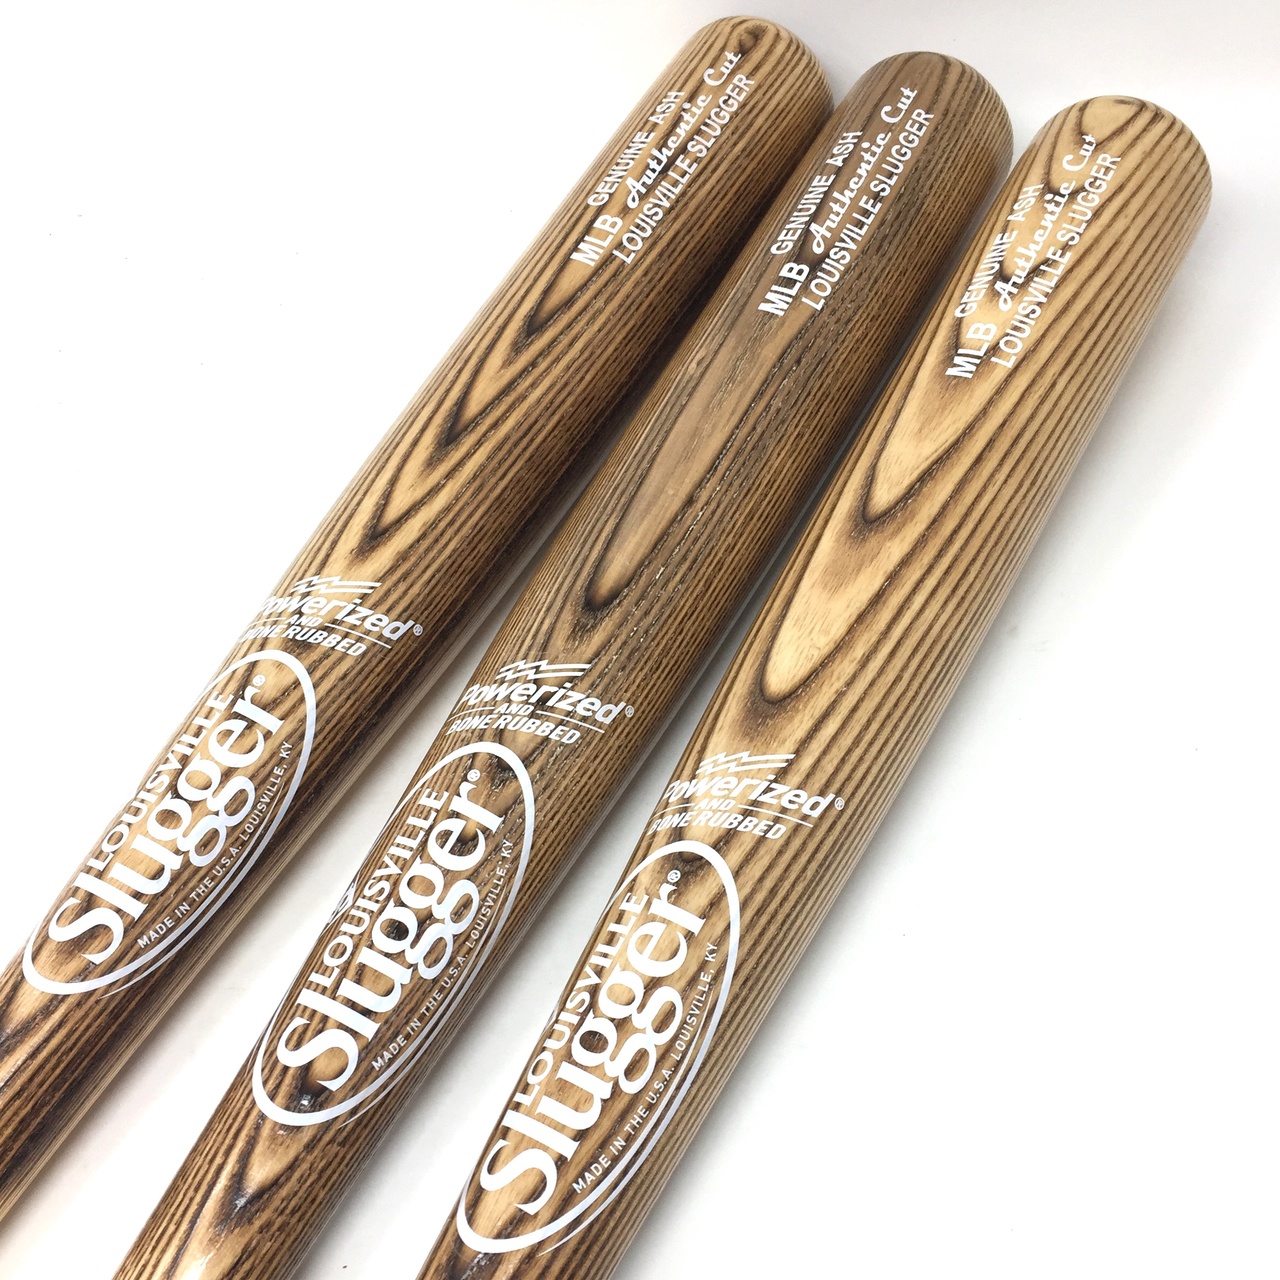 34 inch wood baseball bats by Louisville Slugger. MLB Authentic Cut Ash Wood. 34 inch. Lizard Skin Grip. Powerized and Bone Rubbed. 3 bats in this bat pack.